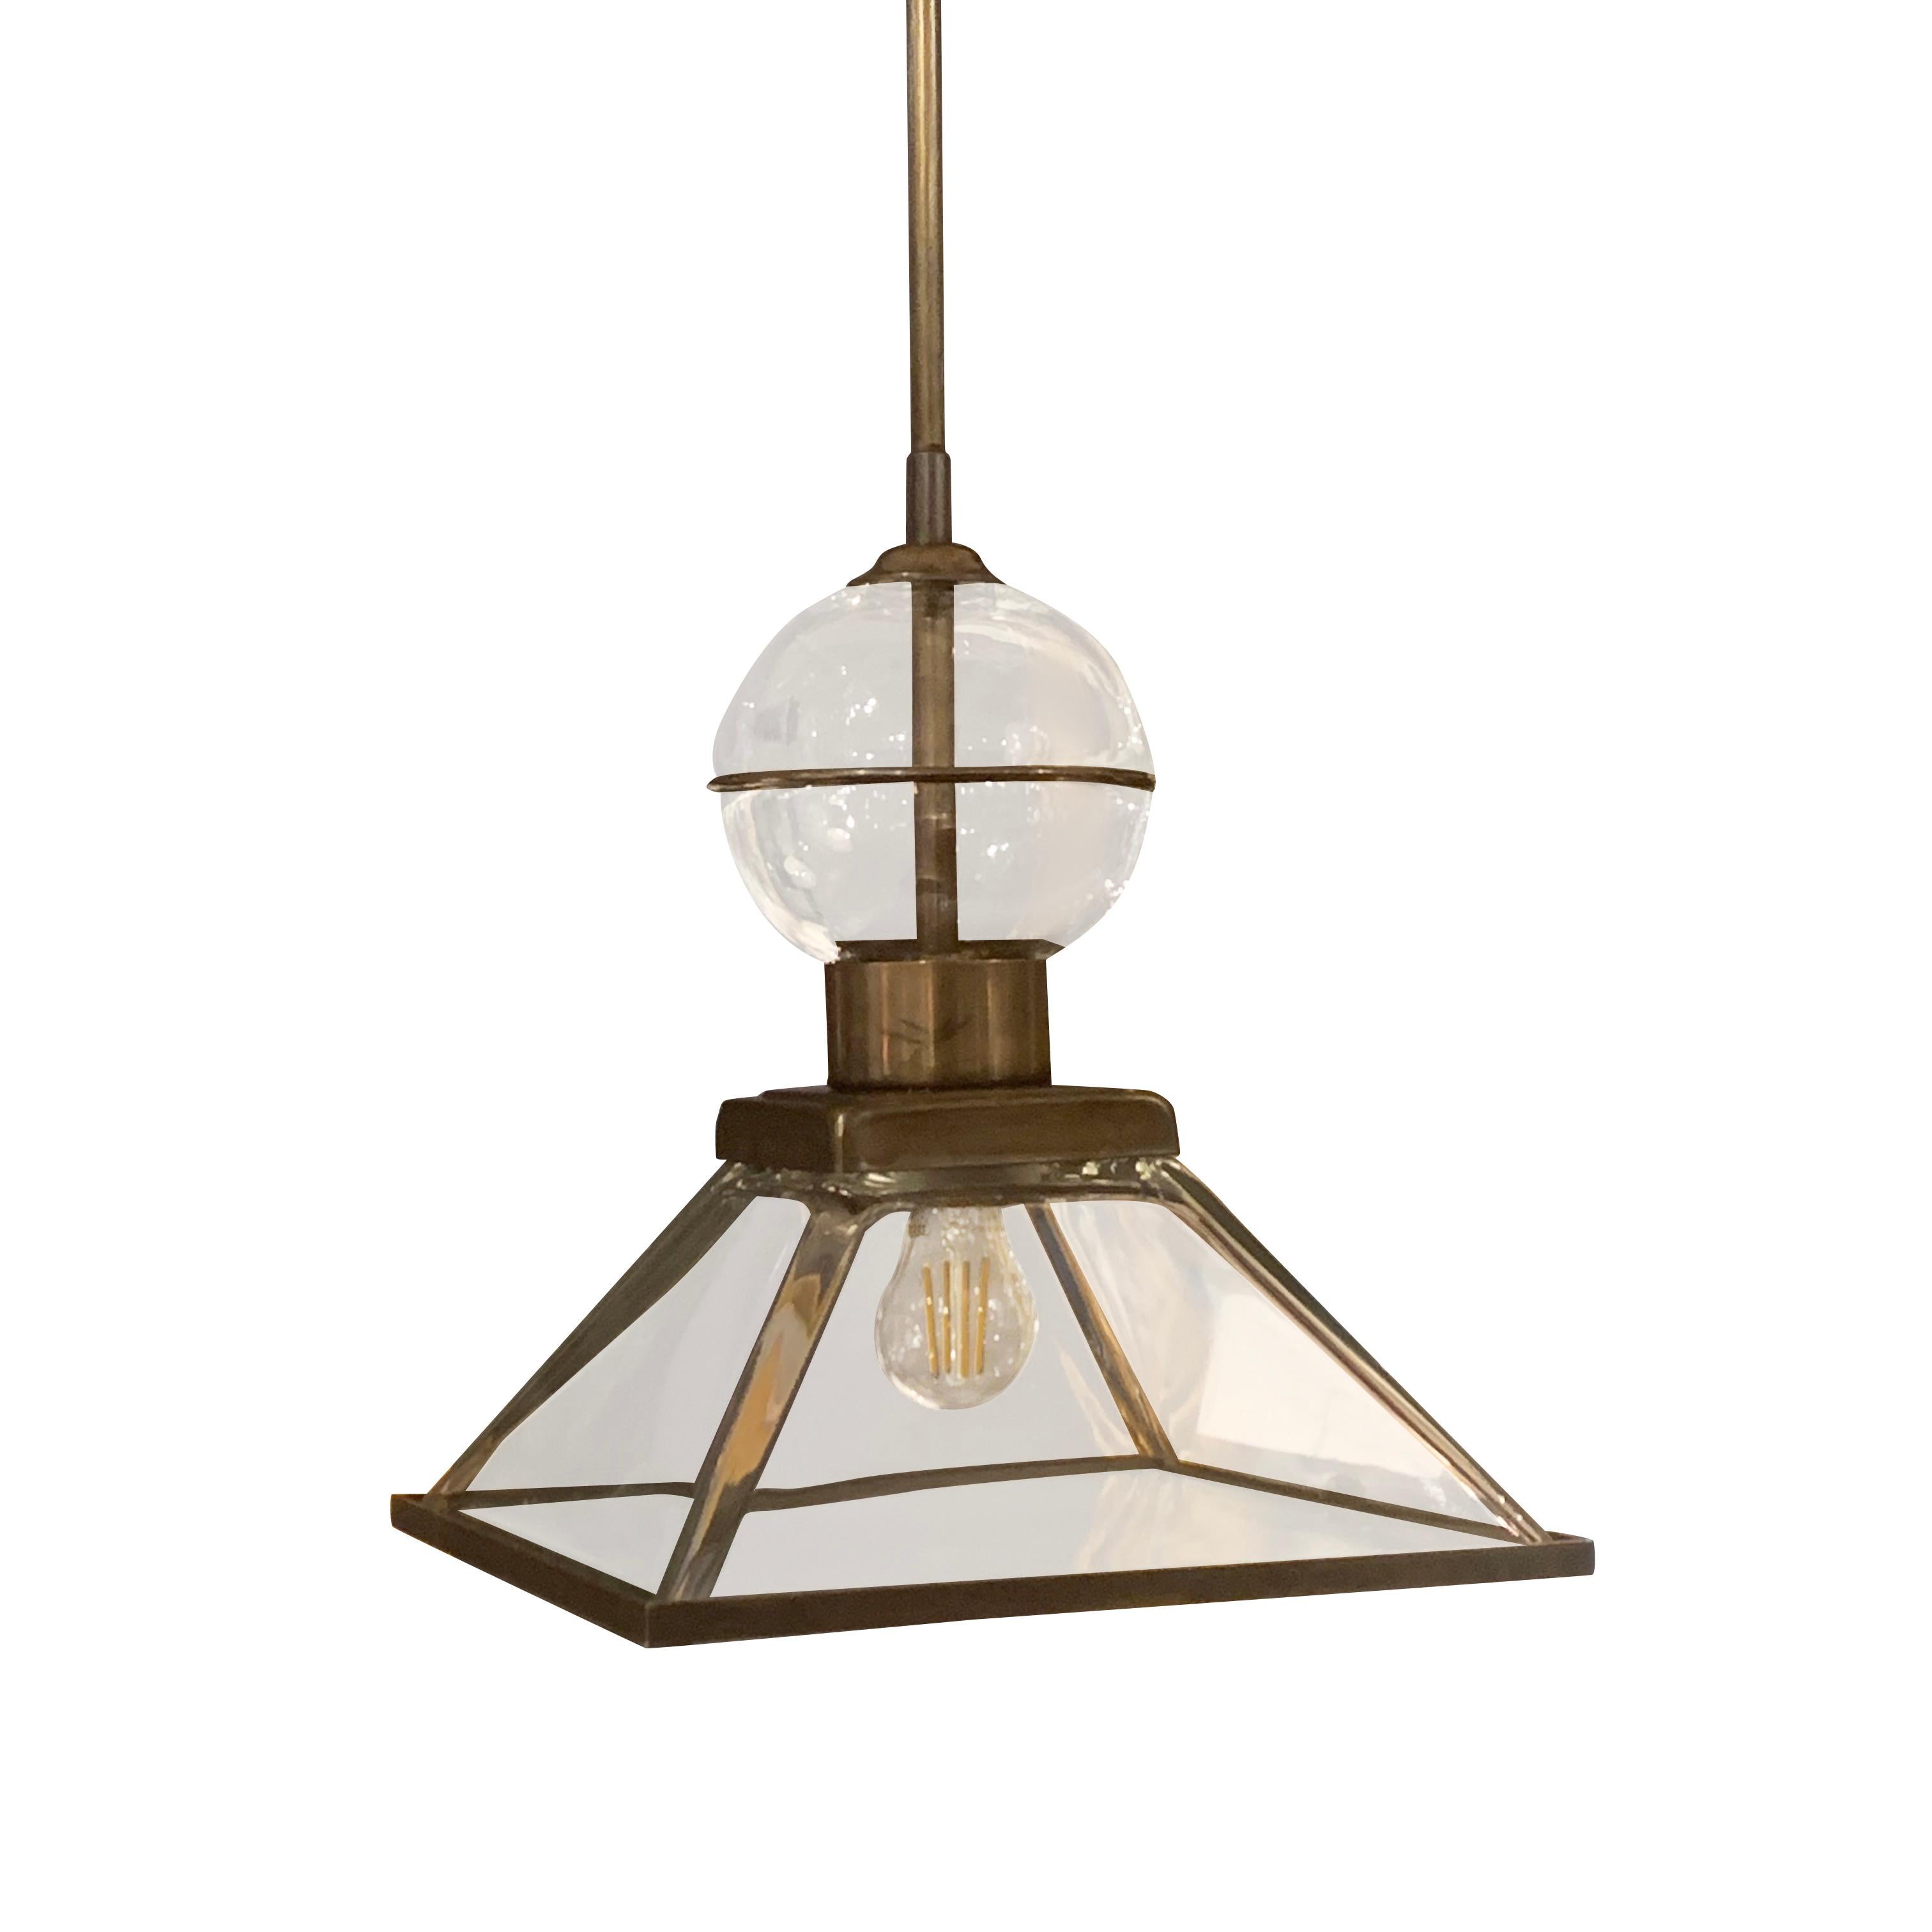 Contemporary Italian pair of square glass pendant lights.
Decorative glass sphere sits atop the pyramid shaped fixture.
Brushed brass surrounding the glass, rod and canopy.
These square glass pendants can be ordered in multiples.
Overall height of